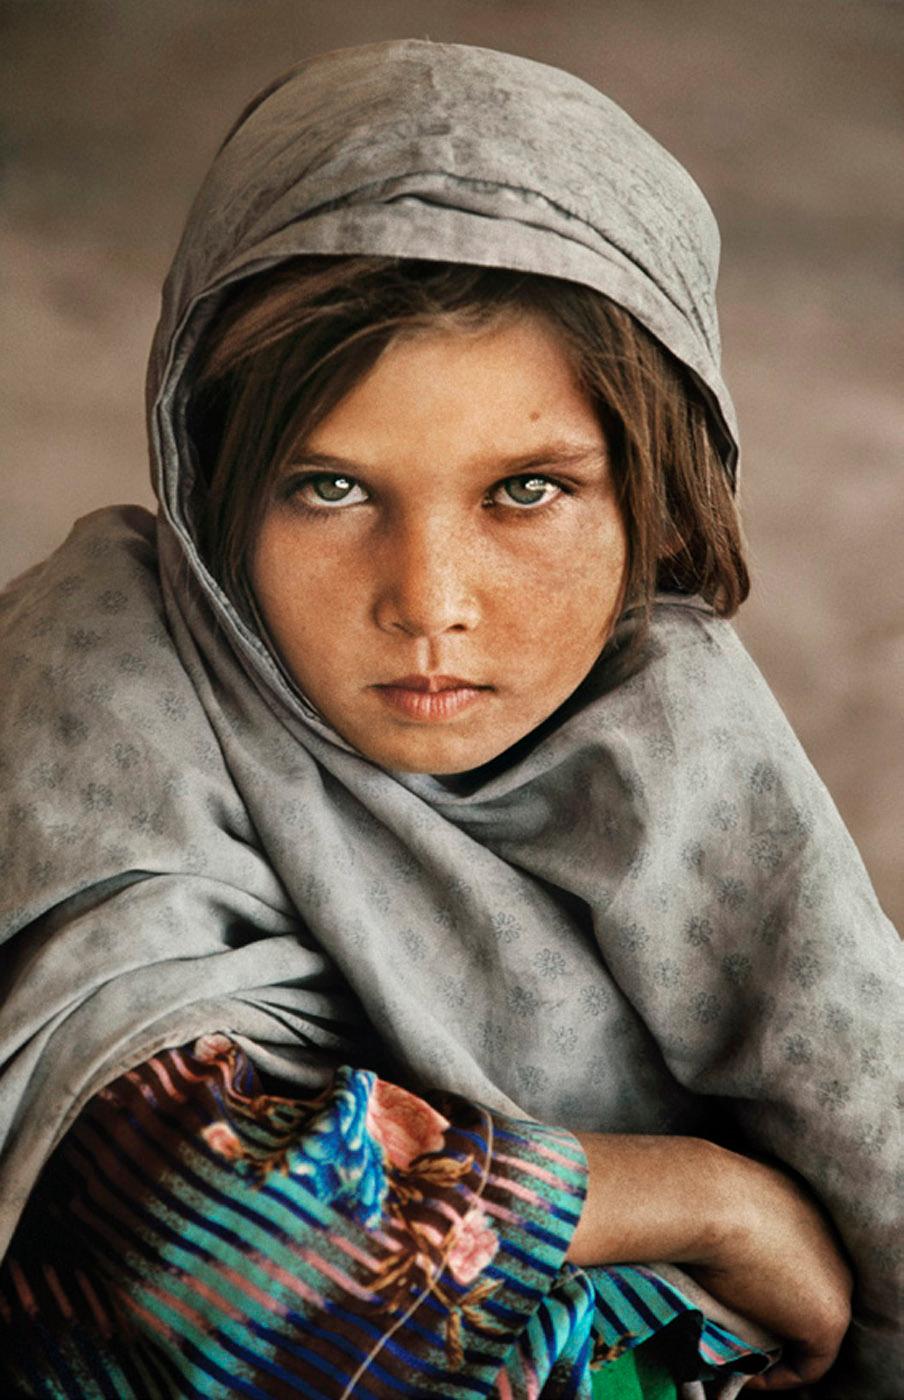 Afghan Nomad Girl
1990
C-Prints printed on FujiFlex Crystal Archive Super Gloss Paper
60 x 40 inches
Signed and numbered edition of 10
with certificate of authenticity

Steve McCurry (American, b.1950) is a photojournalist whose photographic work